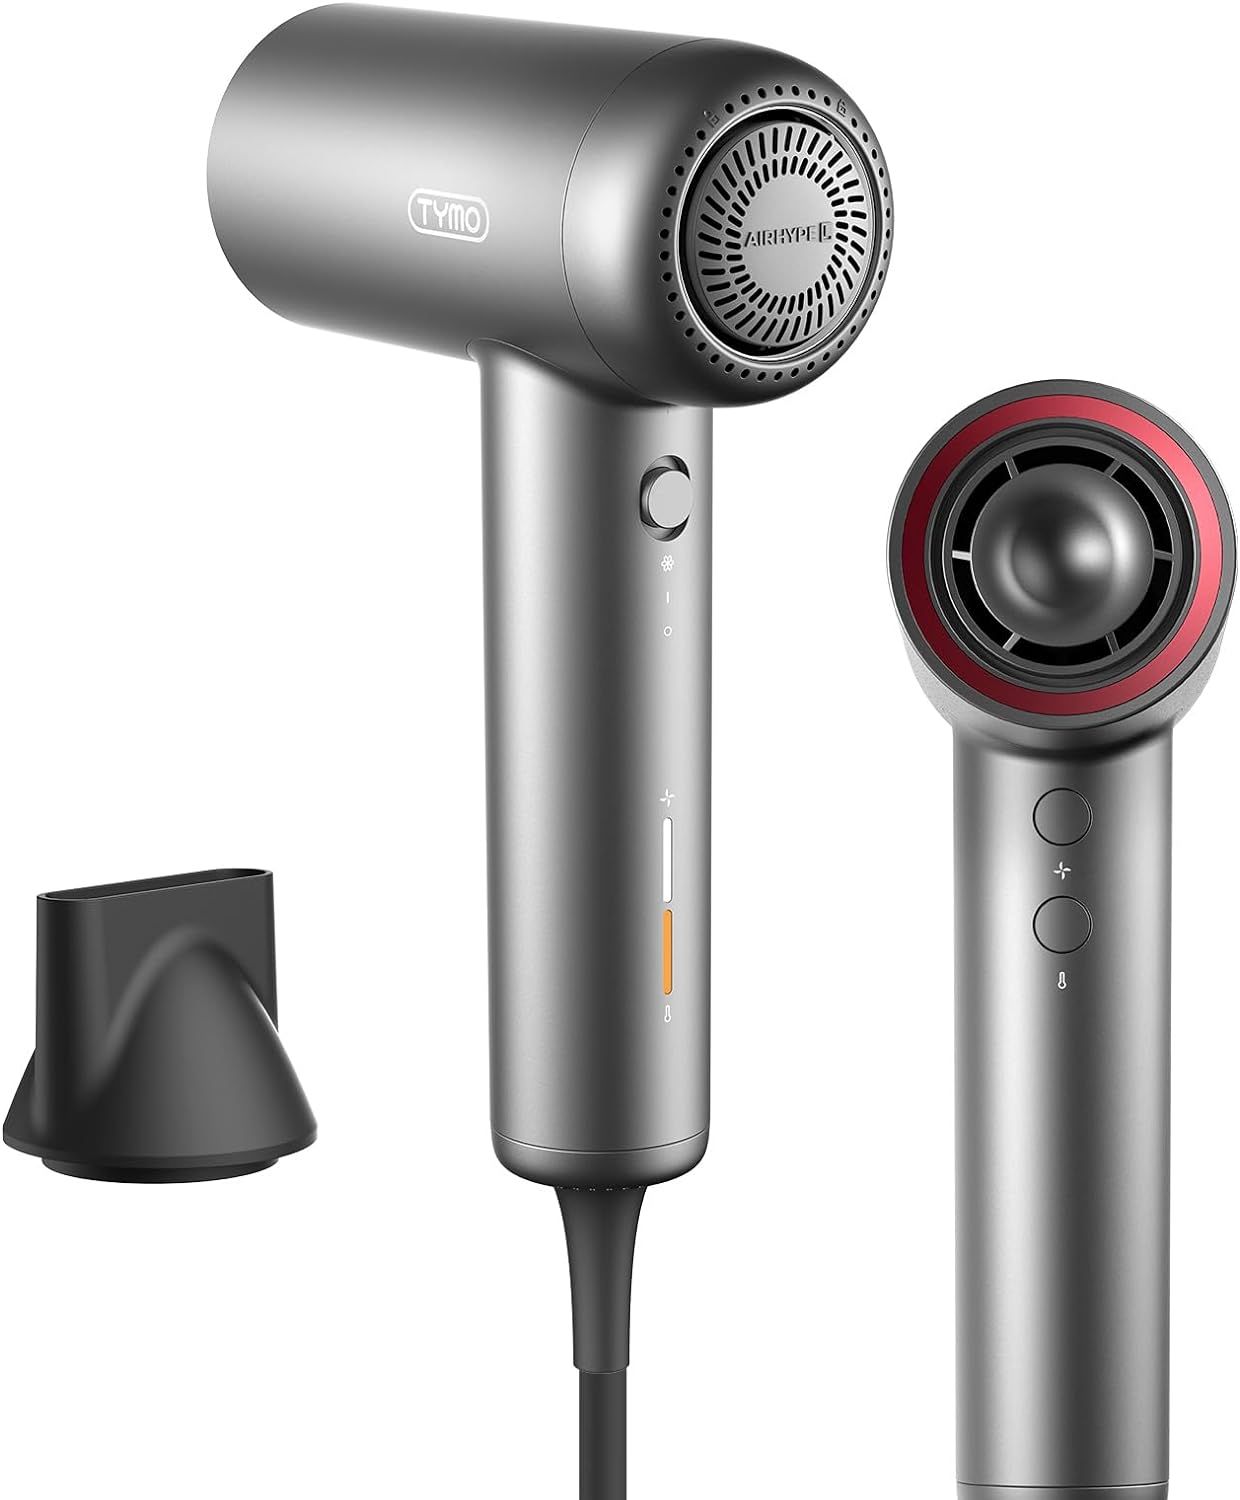 Flash Deal in Progress! Hurry! TYMO Professional Ionic Blow Dryer for Women, Drying Faster with Less Frizz - Limited Time Offer